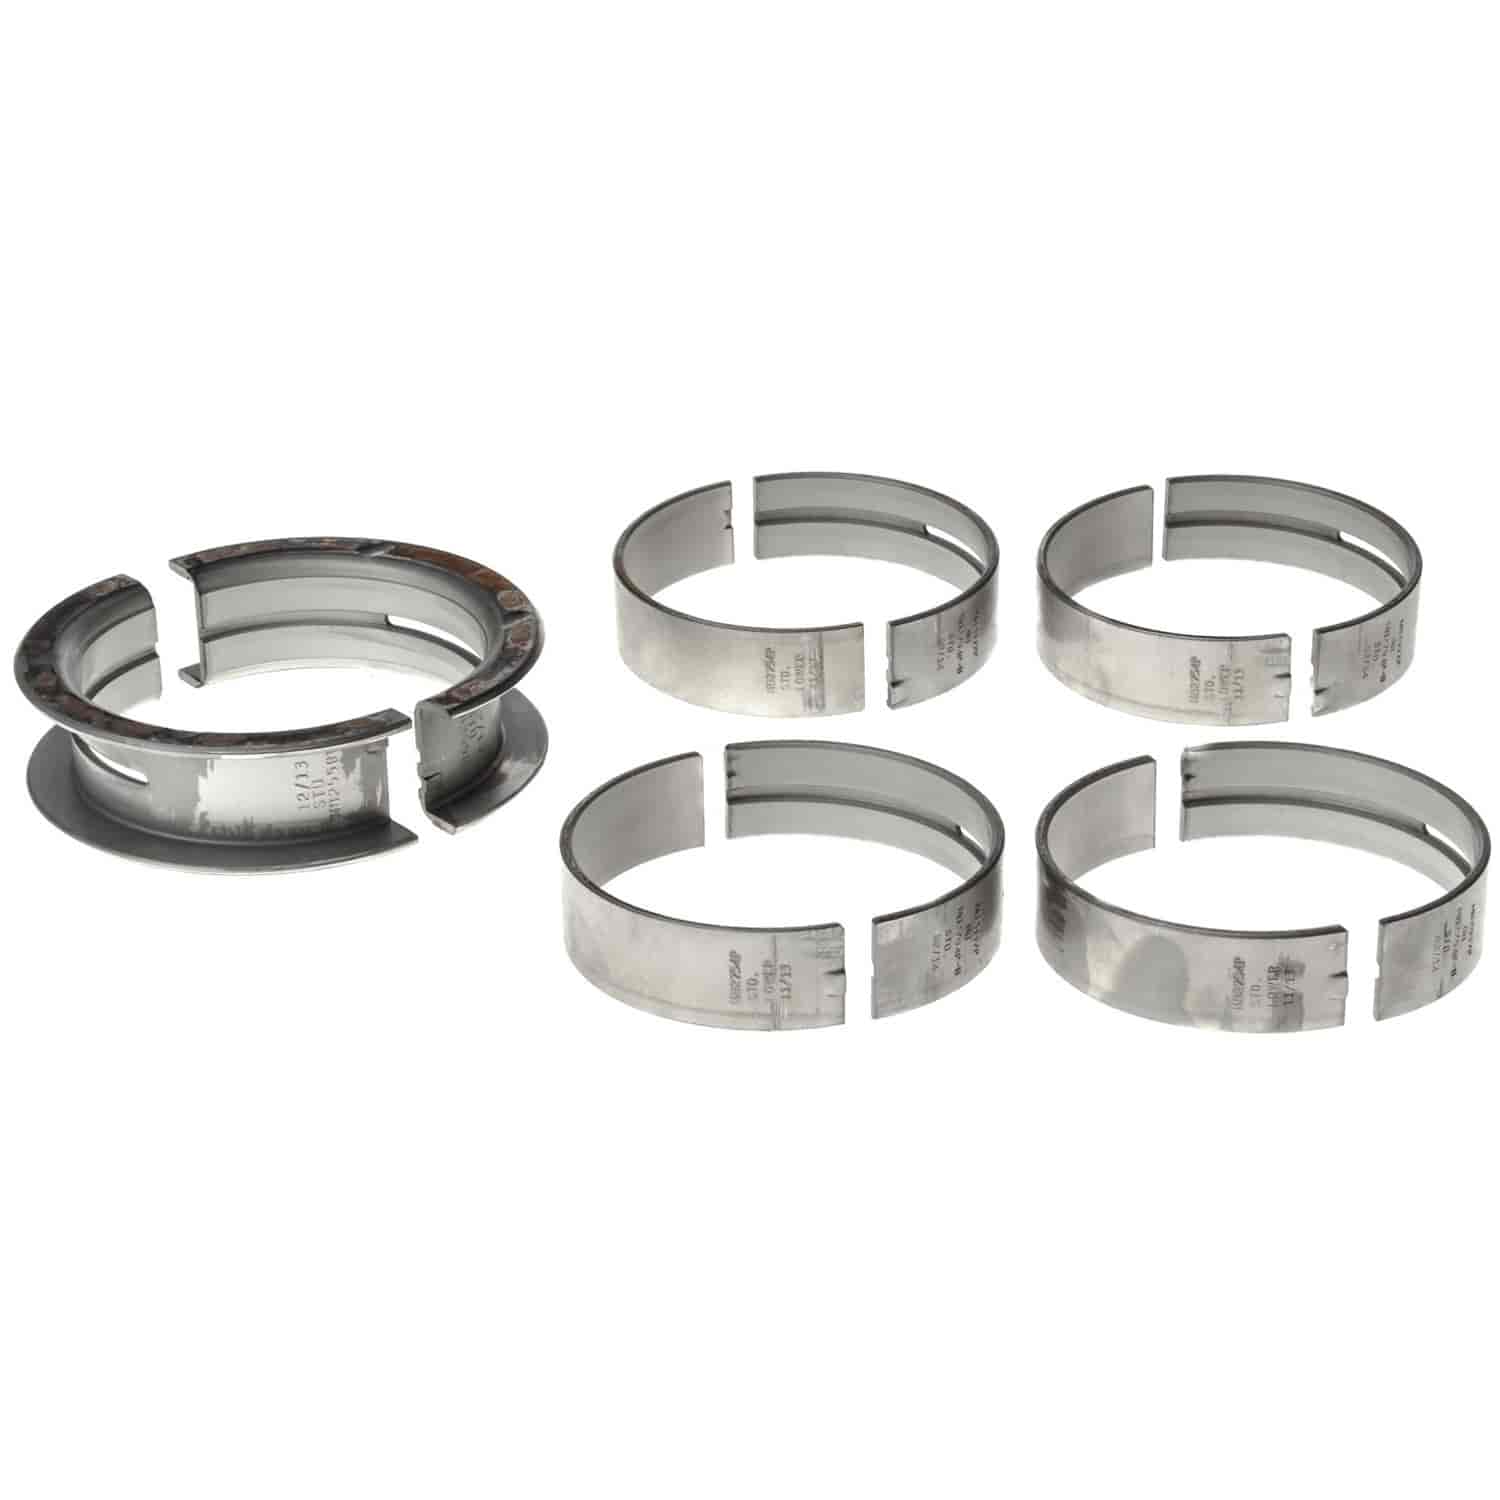 Main Bearing Set Ford 1971-1997 V8 351W/351M/400 (5.8/6.6L) with -.020" Undersize